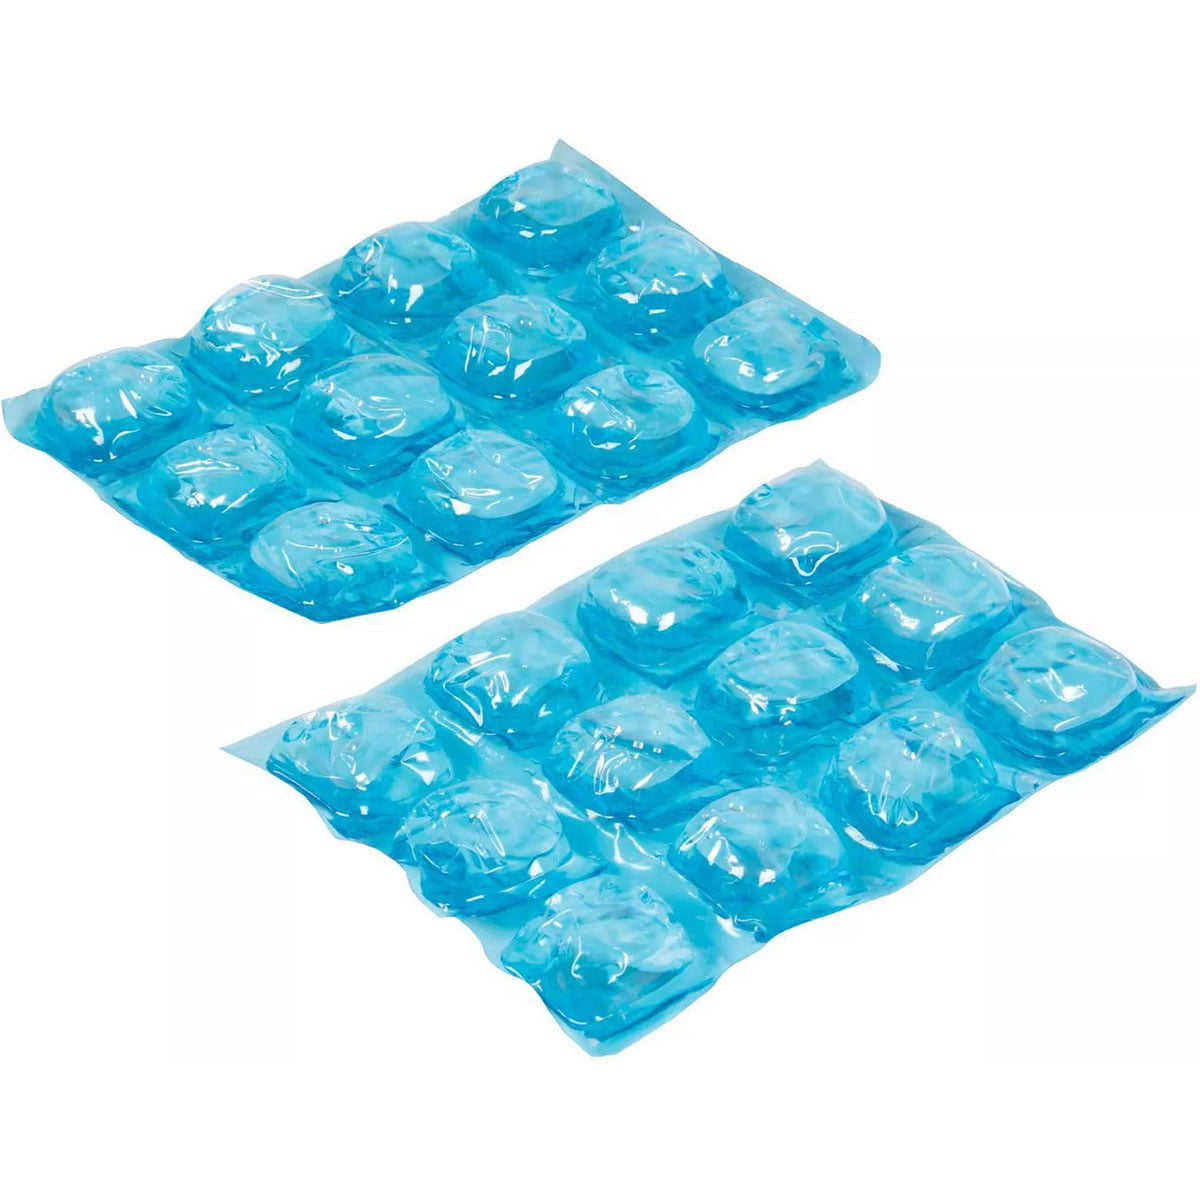  Igloo, Small 2 Pack Ice Block : Sports & Outdoors